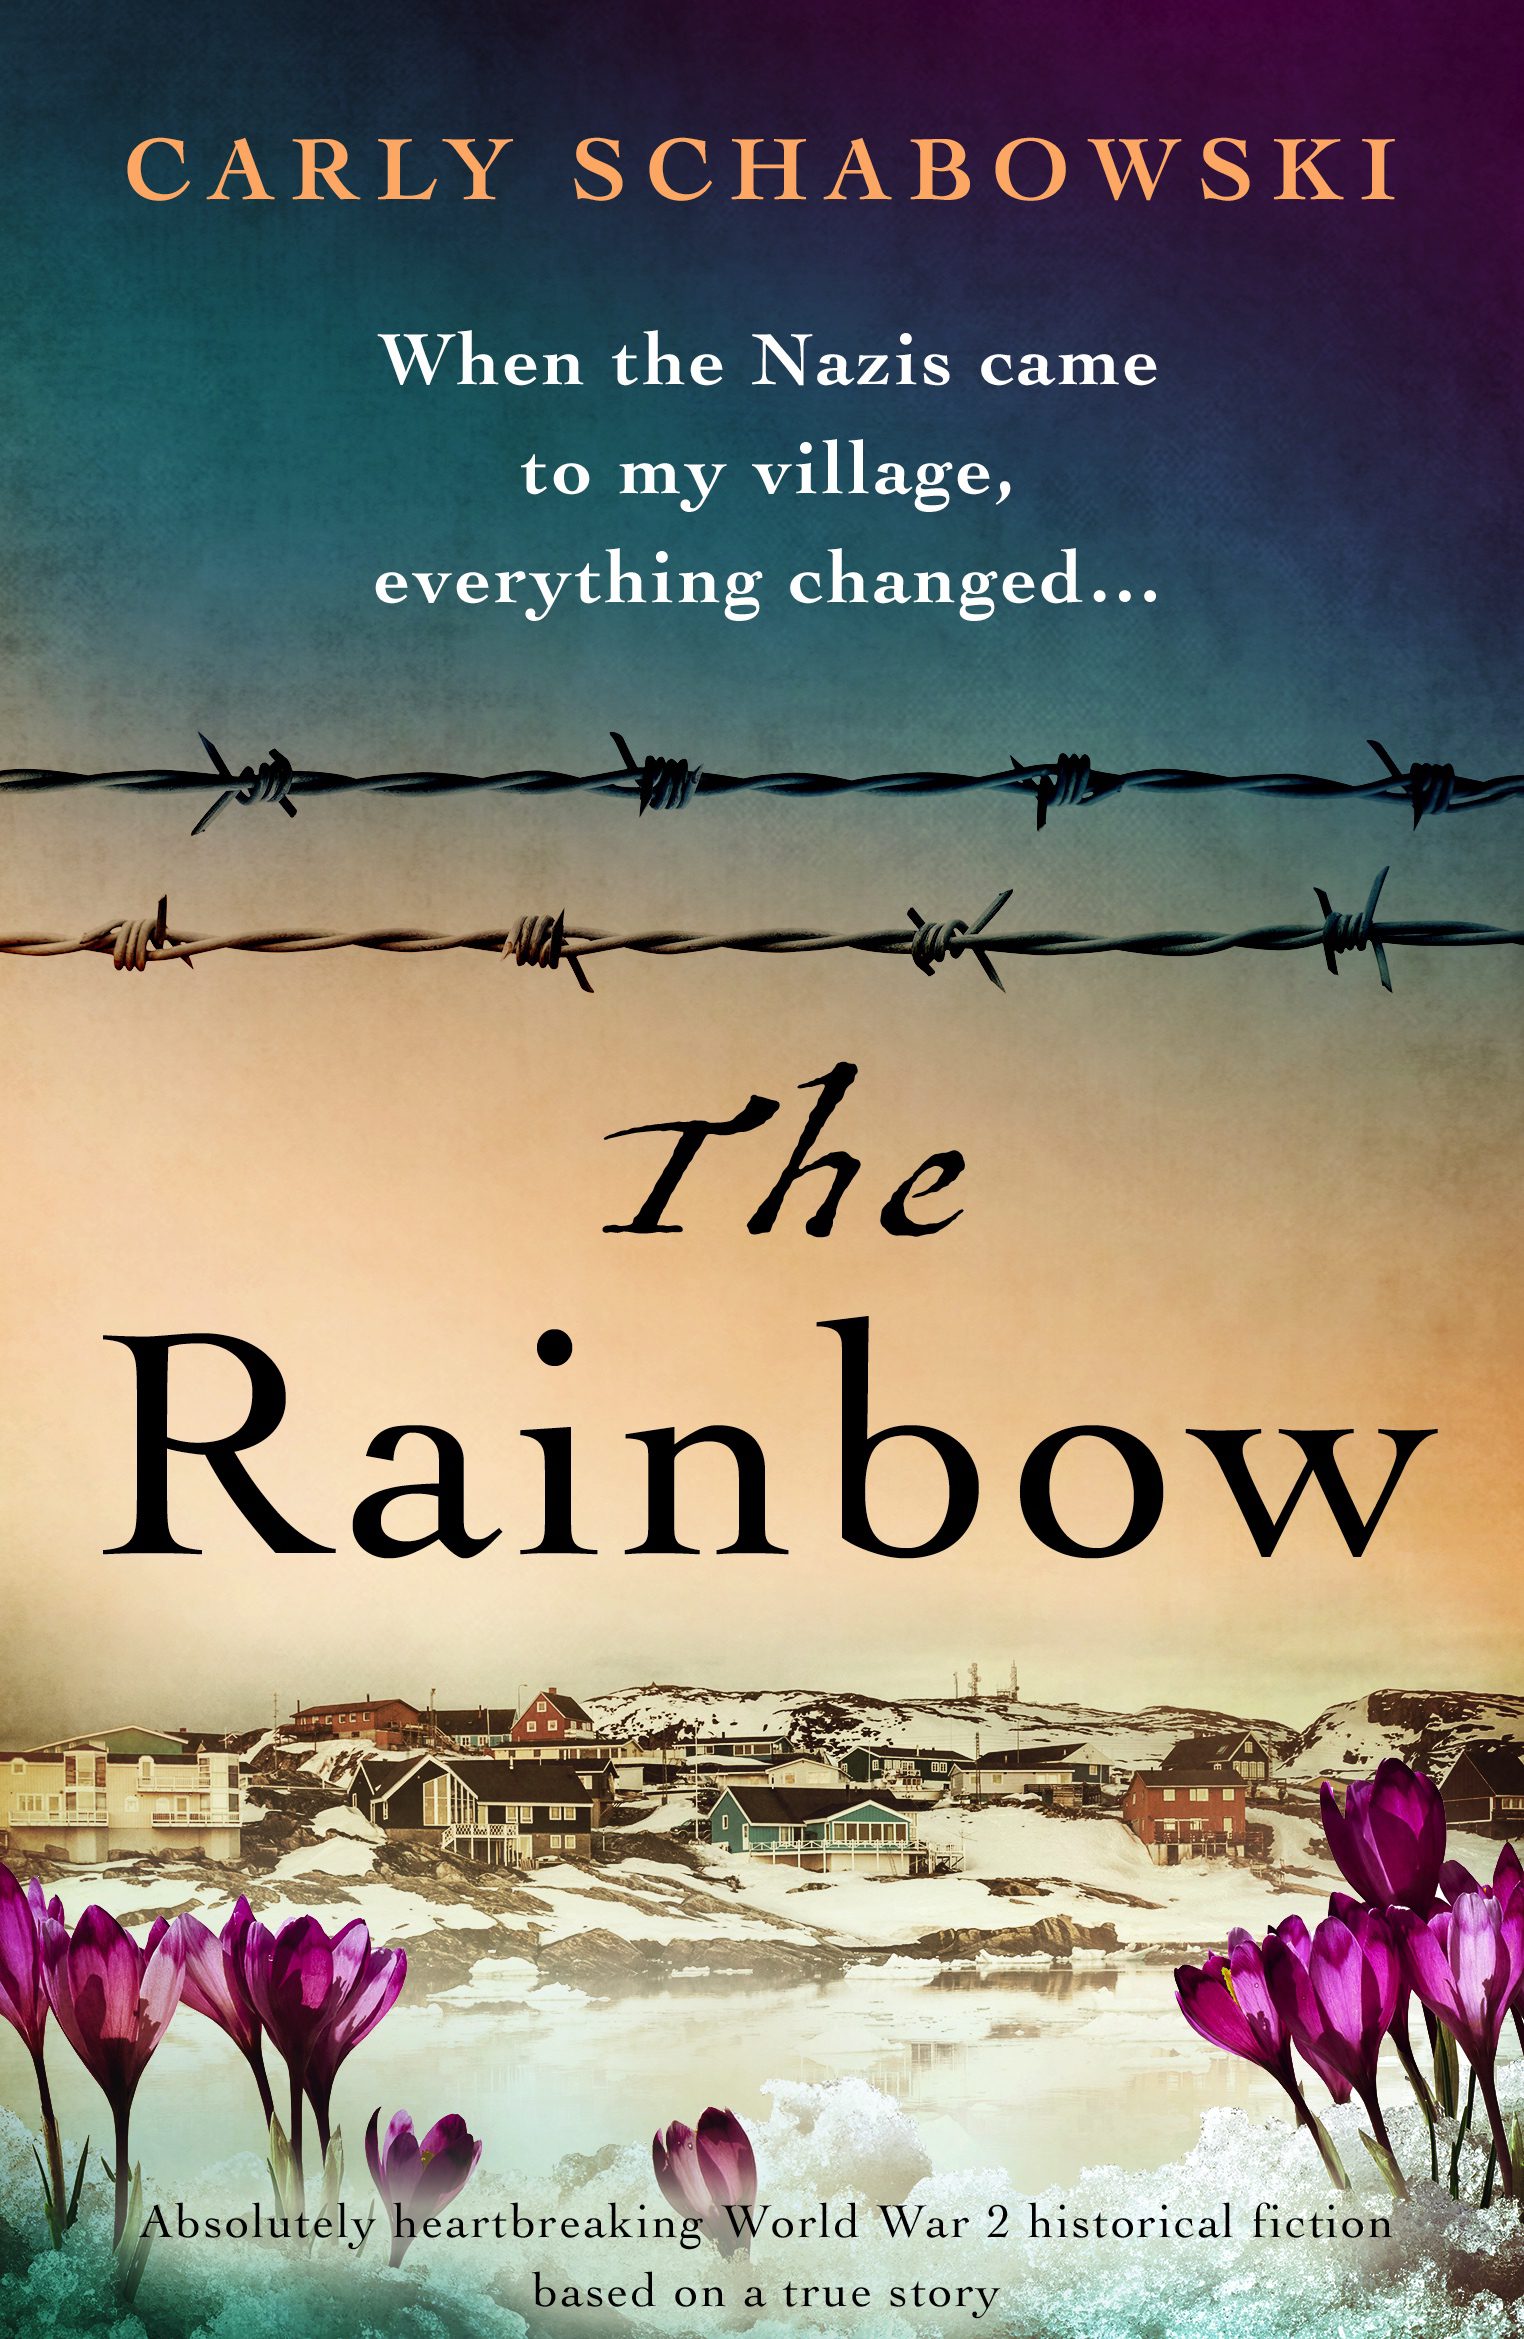 The Rainbow book cover